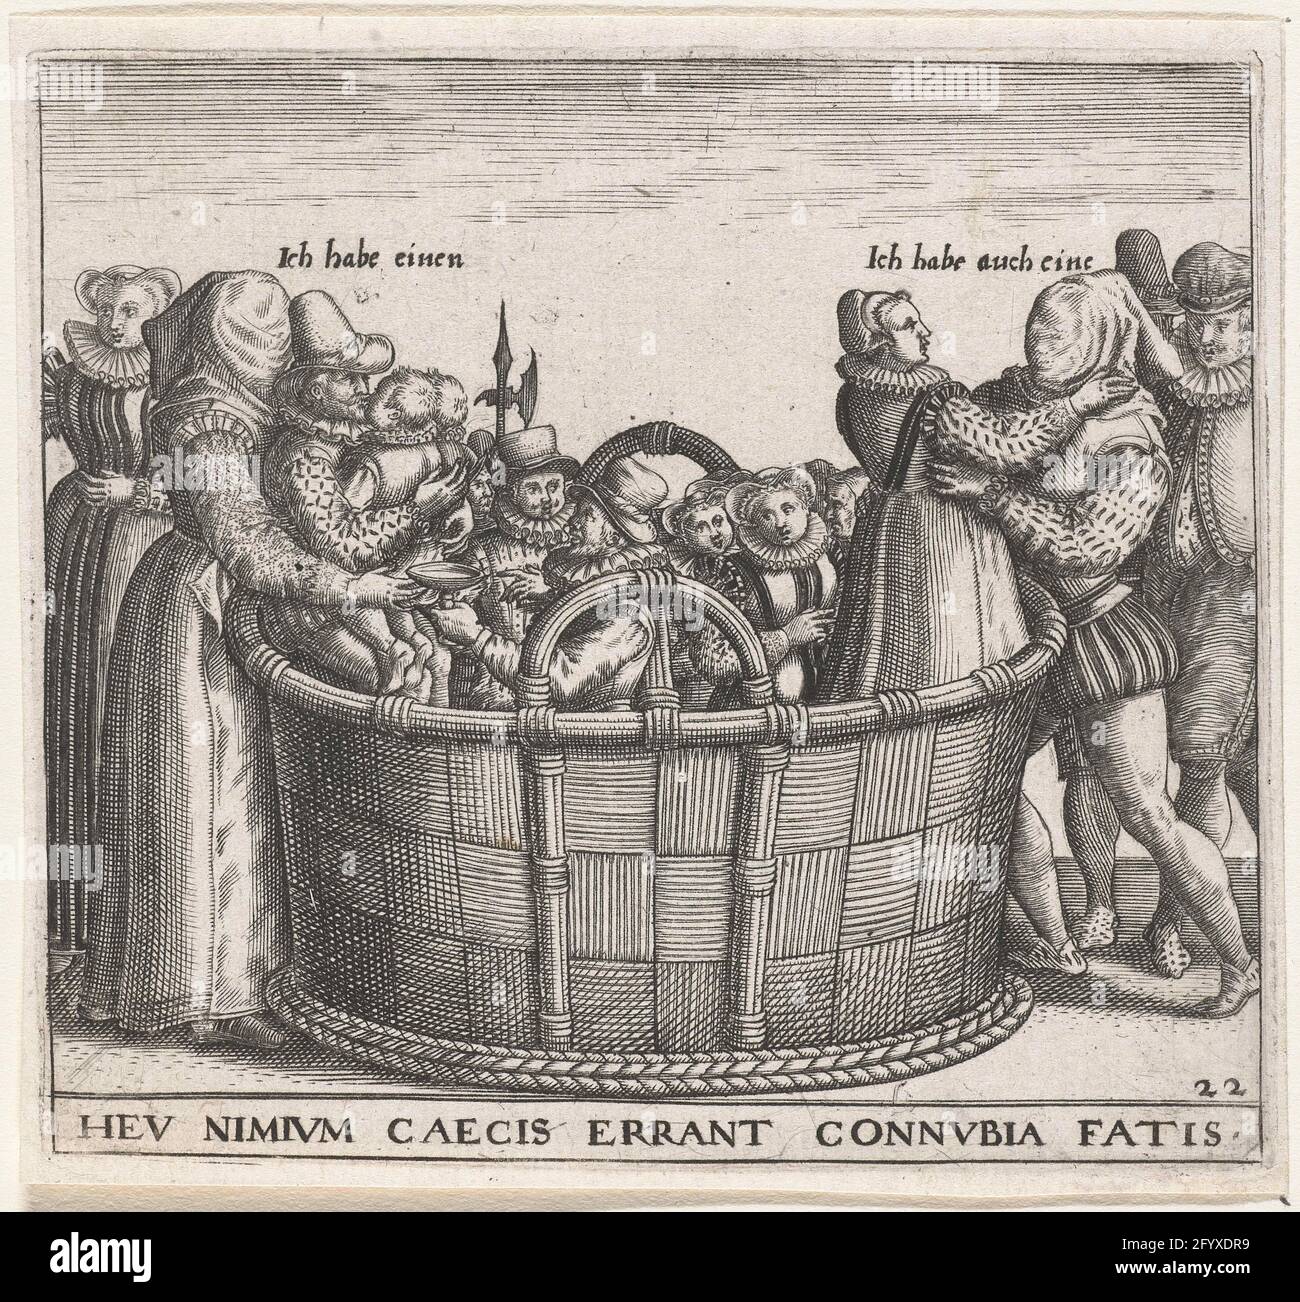 Blind choice for a wedding partner; Heu Nimium Vaecis Errant Connubia Fatis; Emblemata Saecularia, 1596. In a large basket, men and women are as possible wedding candidates. Next to the basket are a man and a woman with a bag over their heads: so they can't see the defects of the wedding candidates. They choose them blindly. The woman left a widower from the basket that holds two children in his arms. The man on the right has a woman to grab. Emblem no. 22 in Emblemata Saecularia, 1596 and No. 43 in the second edition of 1611. Stock Photo